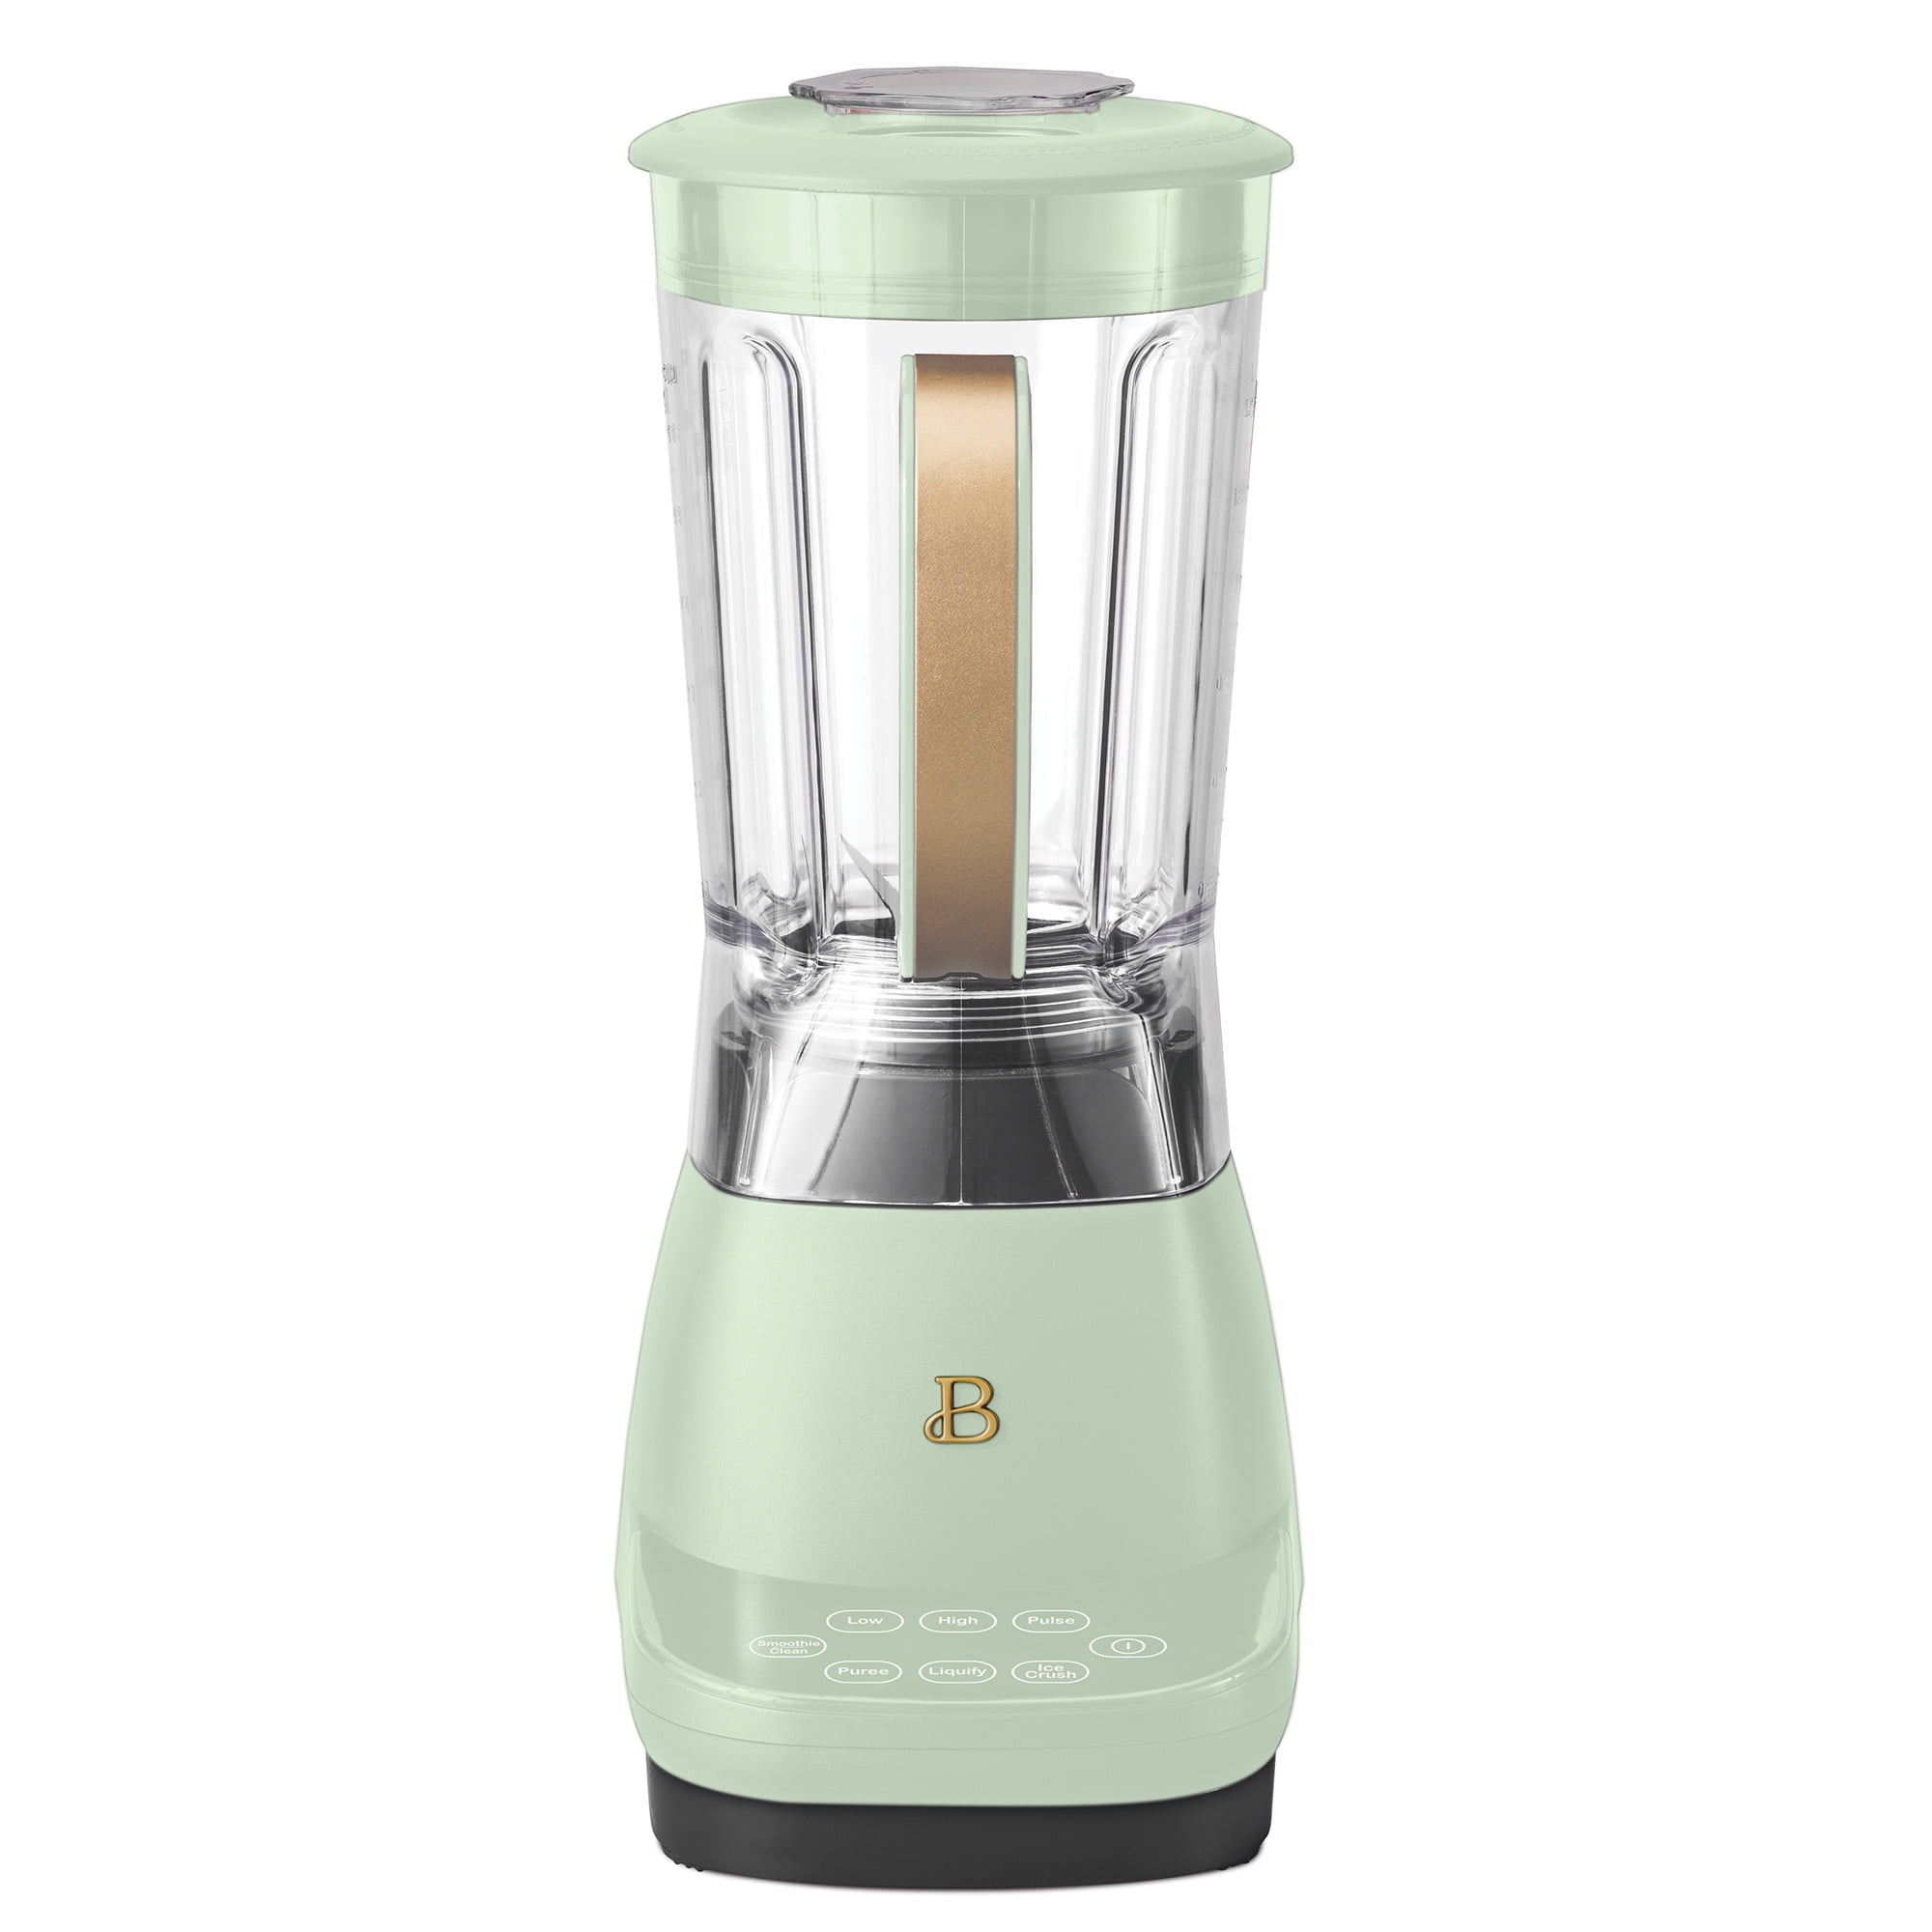 lilac Teenage years crystal Beautiful High Performance Touchscreen Blender, Sage Green by Drew  Barrymore - Walmart.com